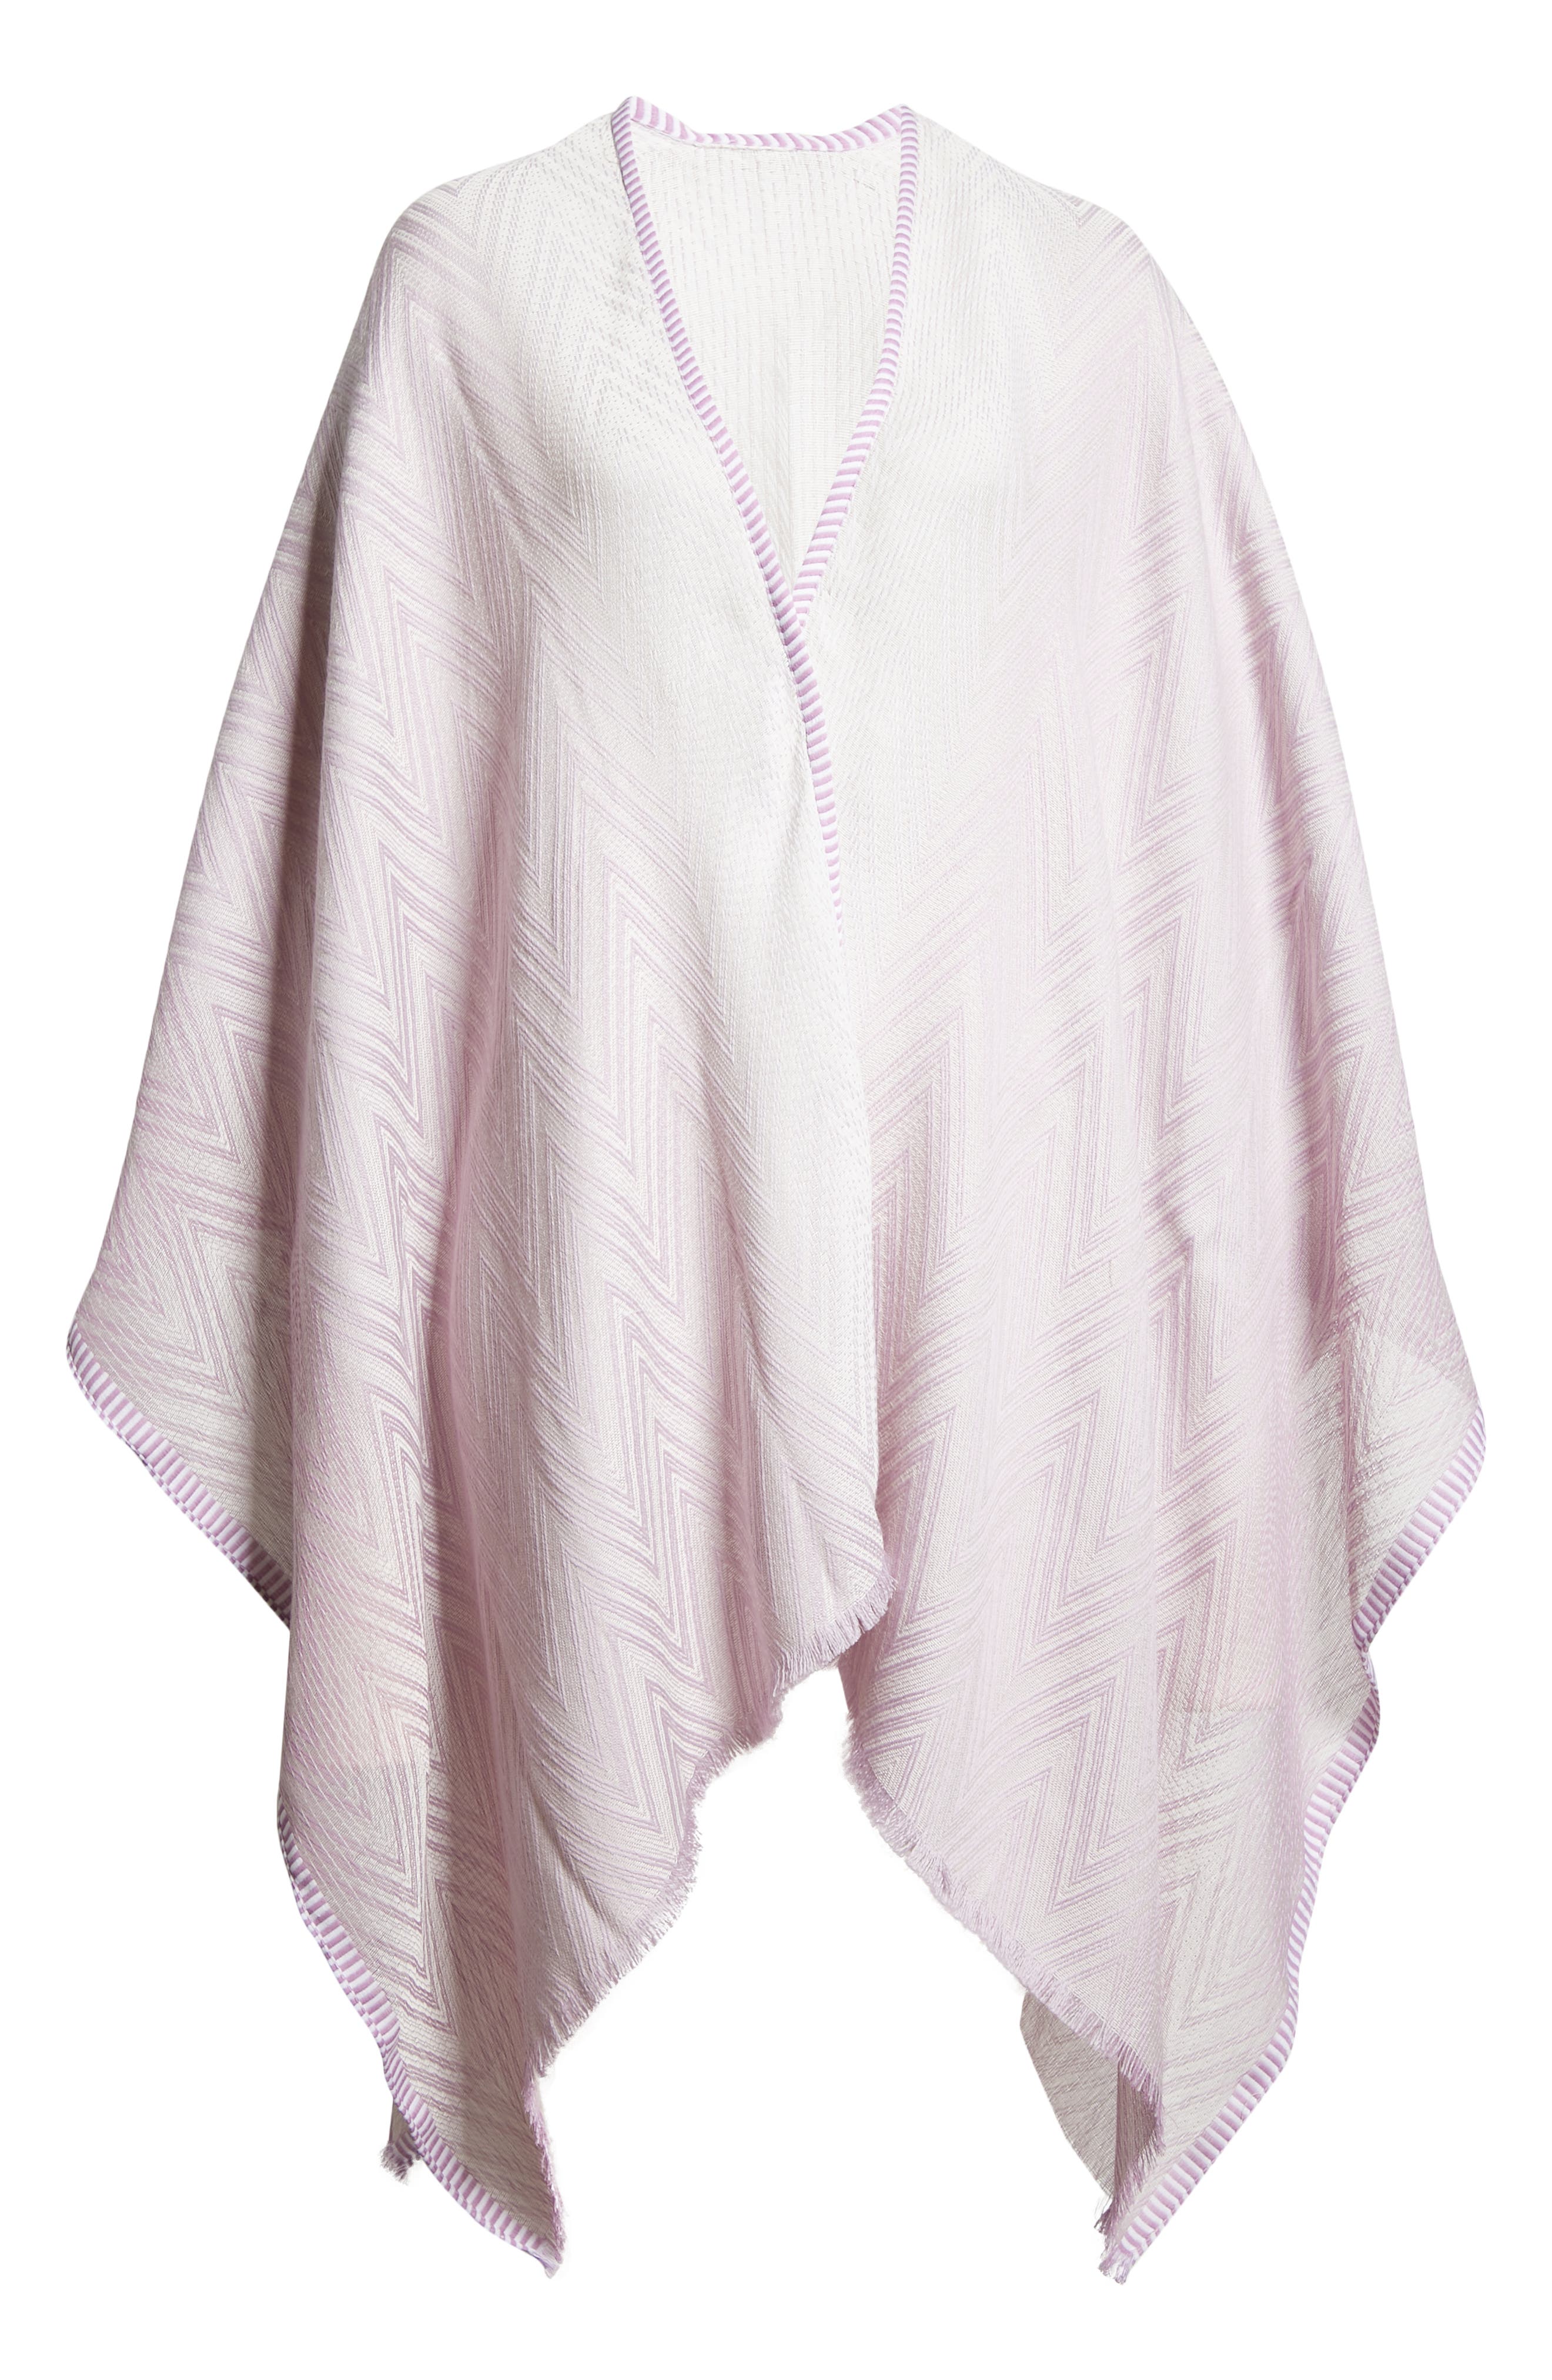 Missoni Cotton & Wool Cape in Pink at Nordstrom